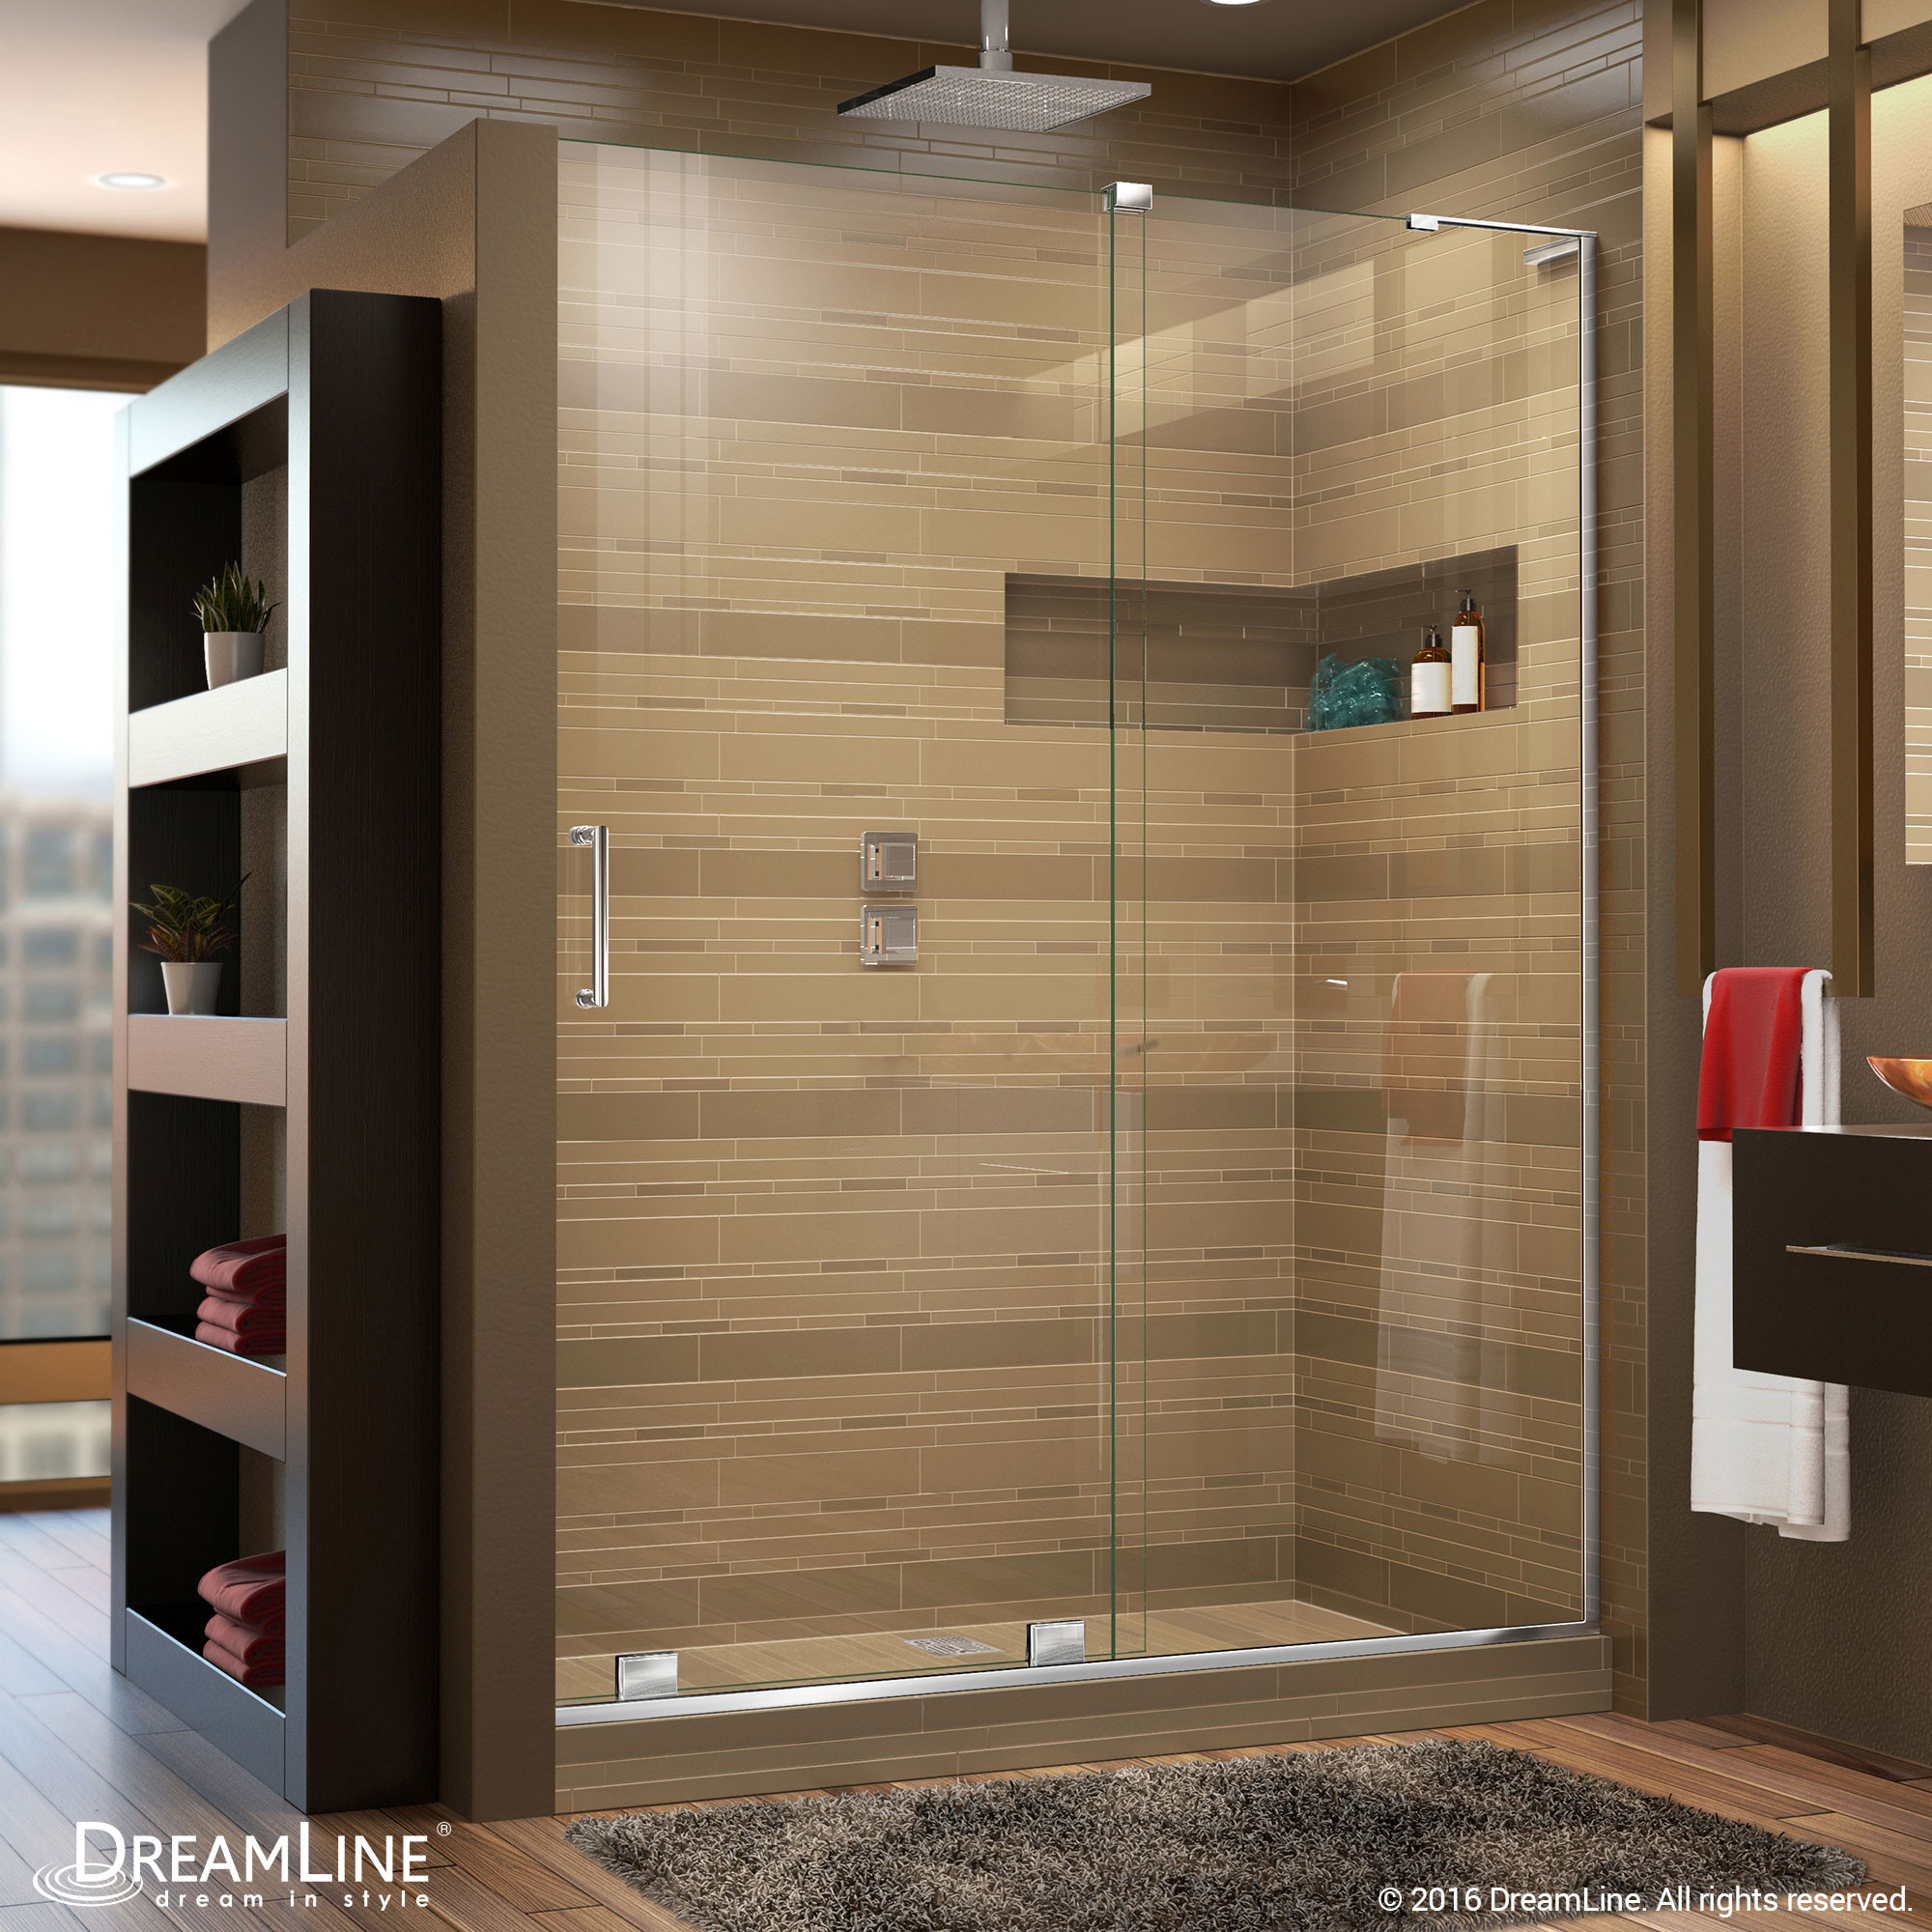 DreamLine SHDR-1960723R-01 Mirage-X Sliding Shower Door With Right-wall Bracket